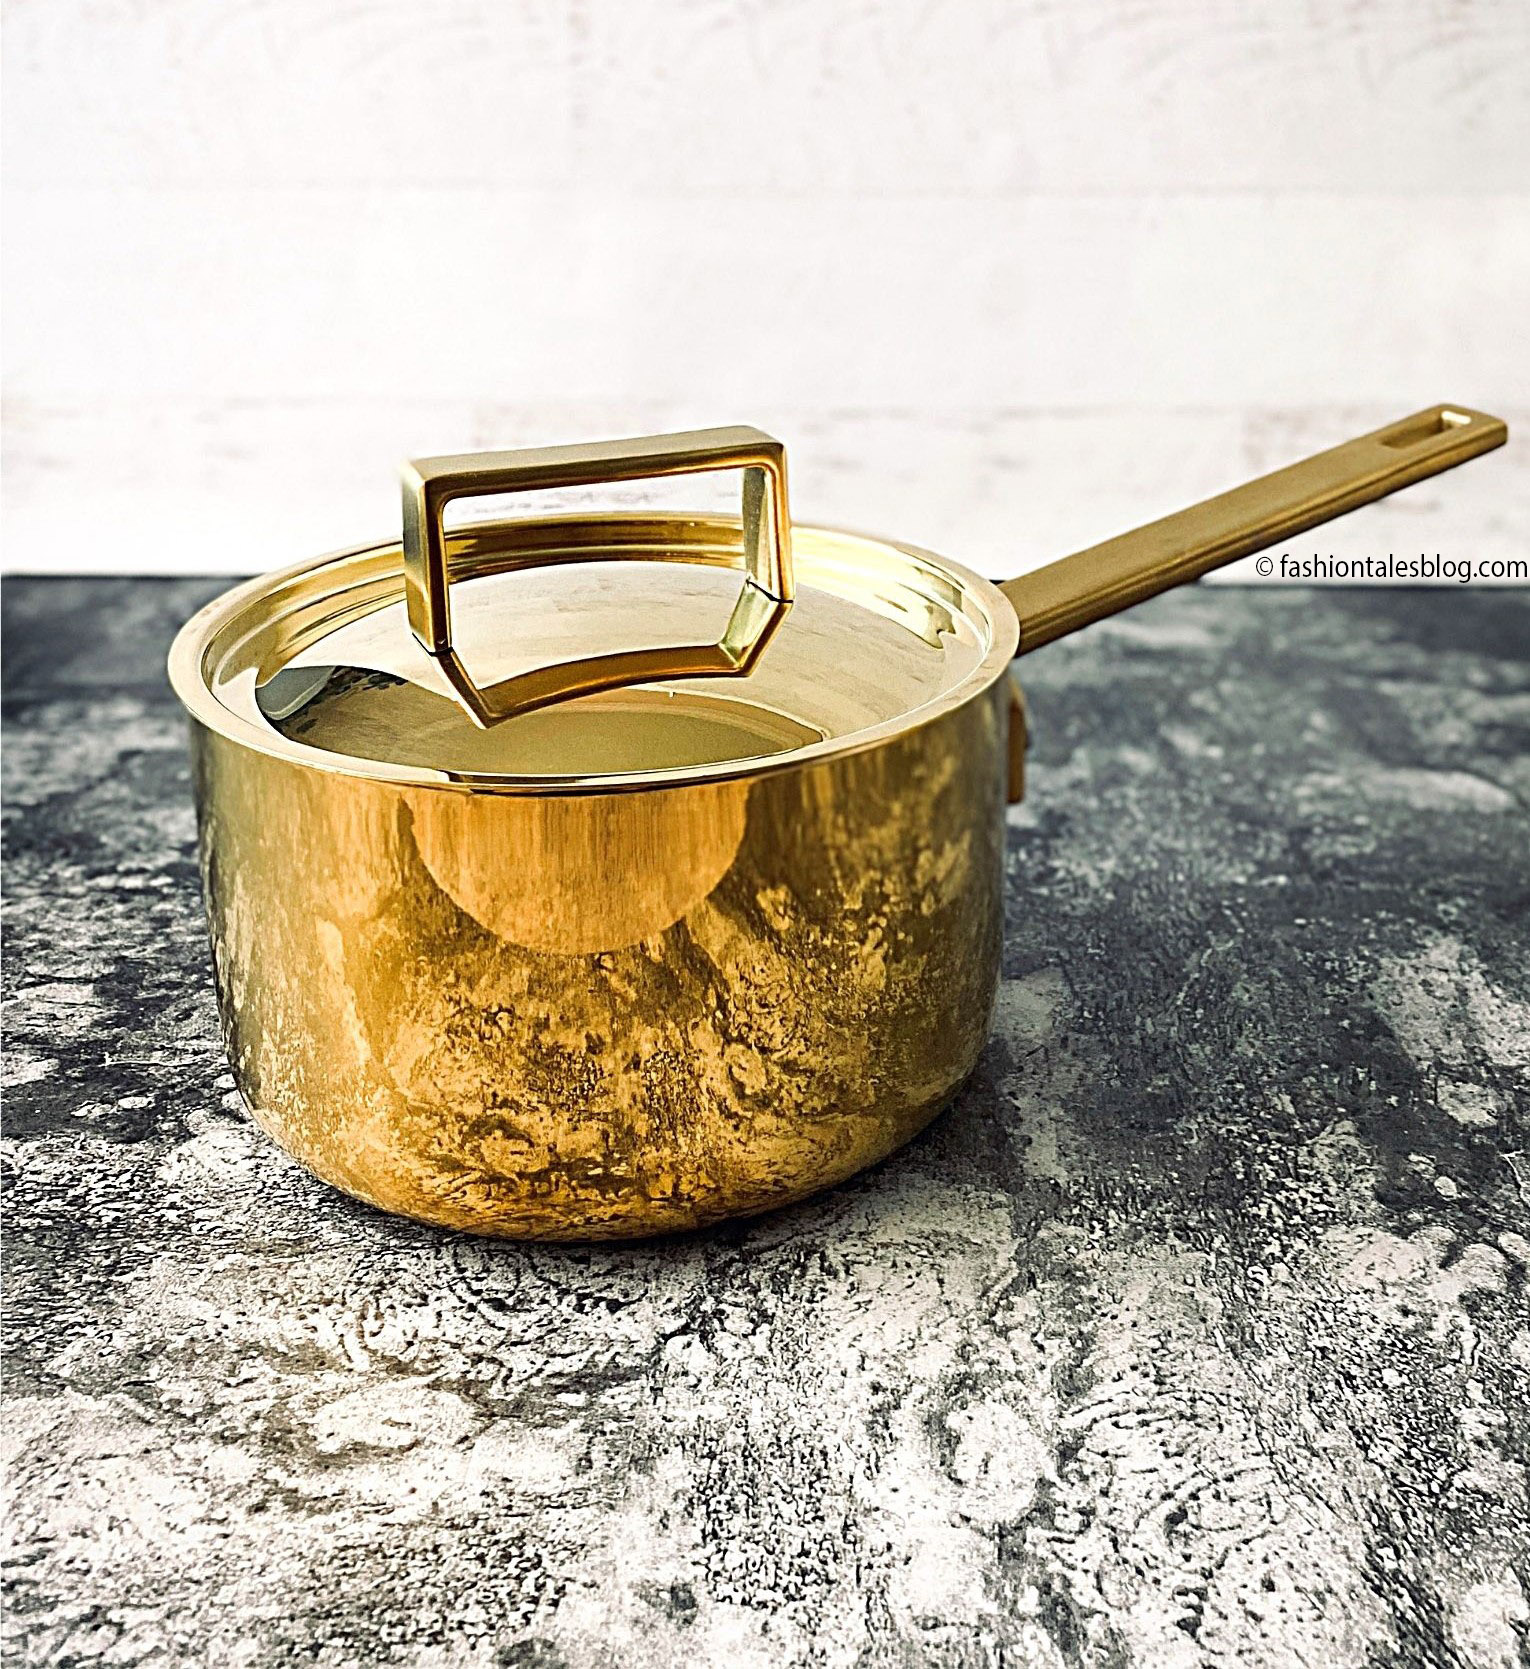 Frying pan one handle 'Attiva' gold - Attiva Gold - Cookware